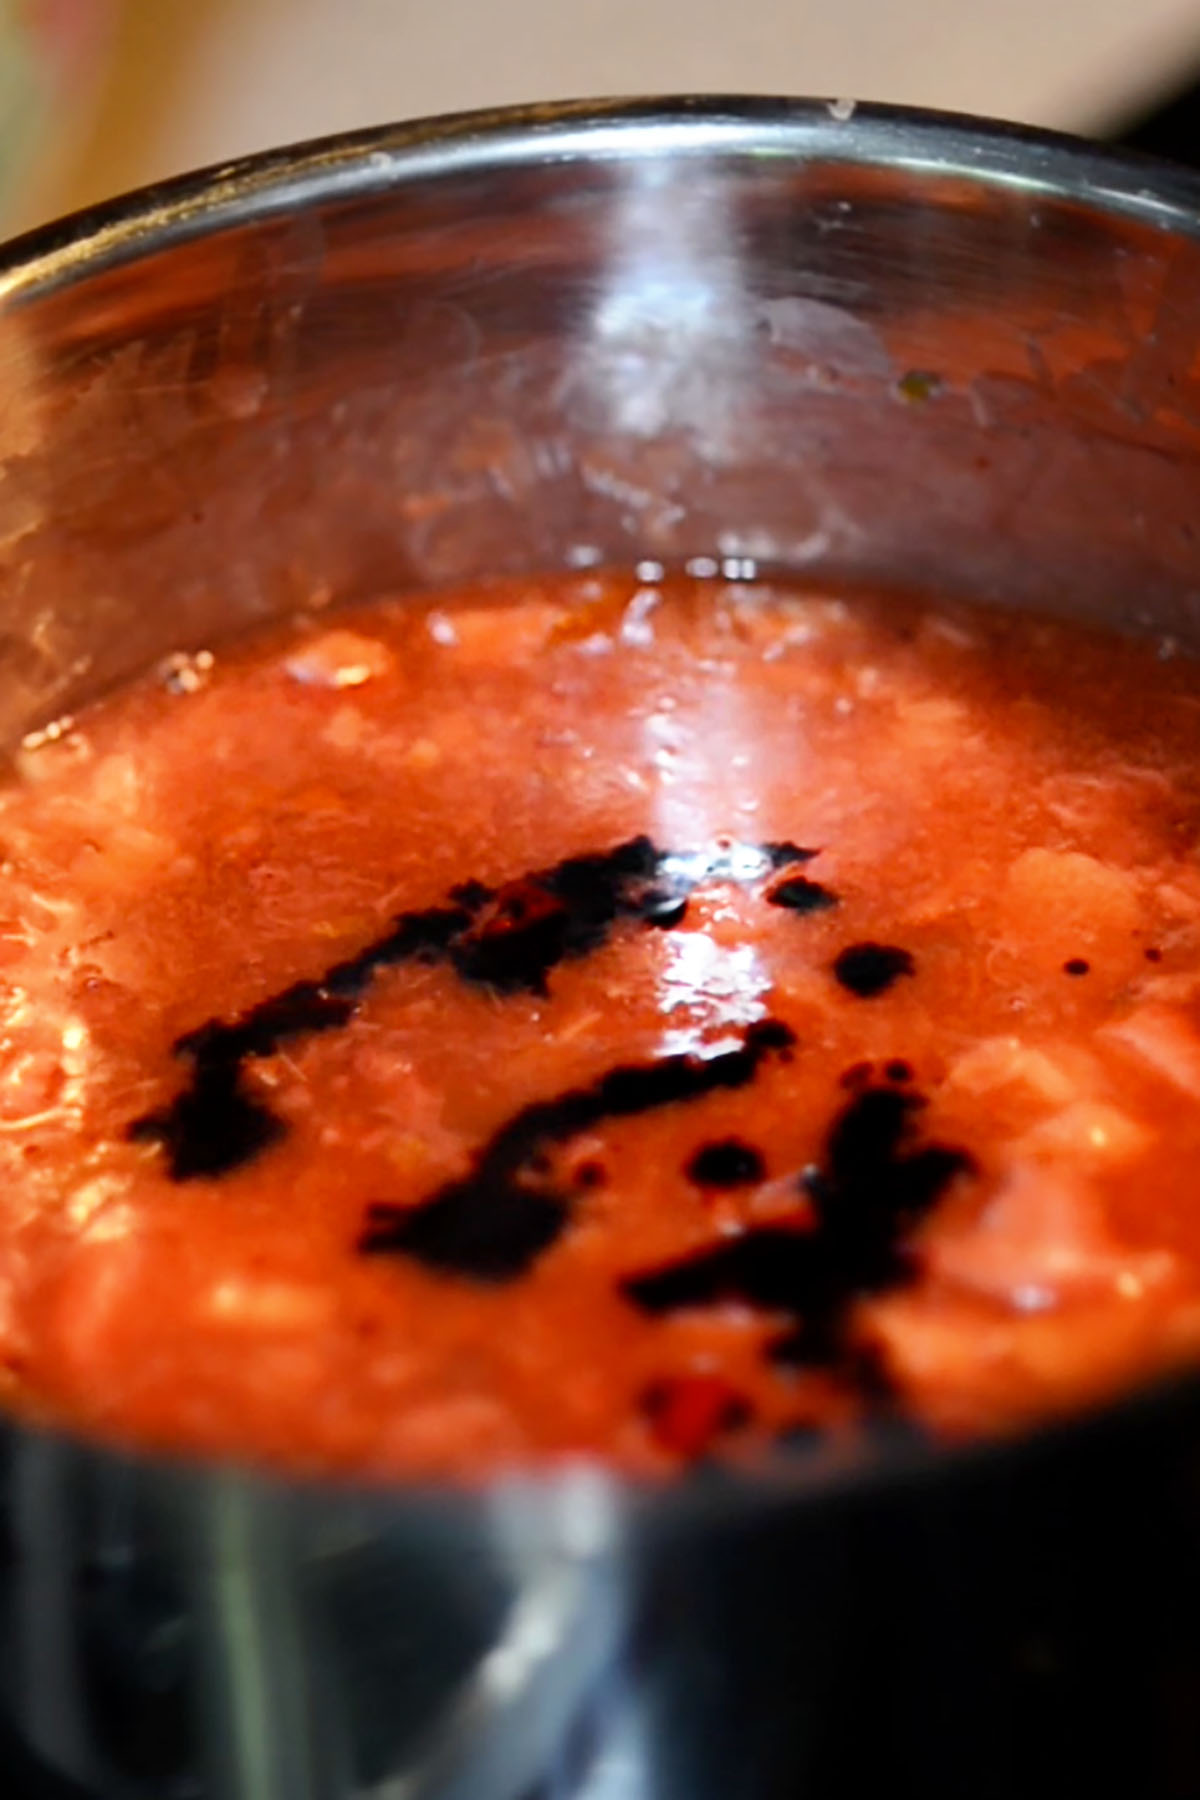 Red food coloring added to a strawberry rhubarb mixture in a sauce pan.